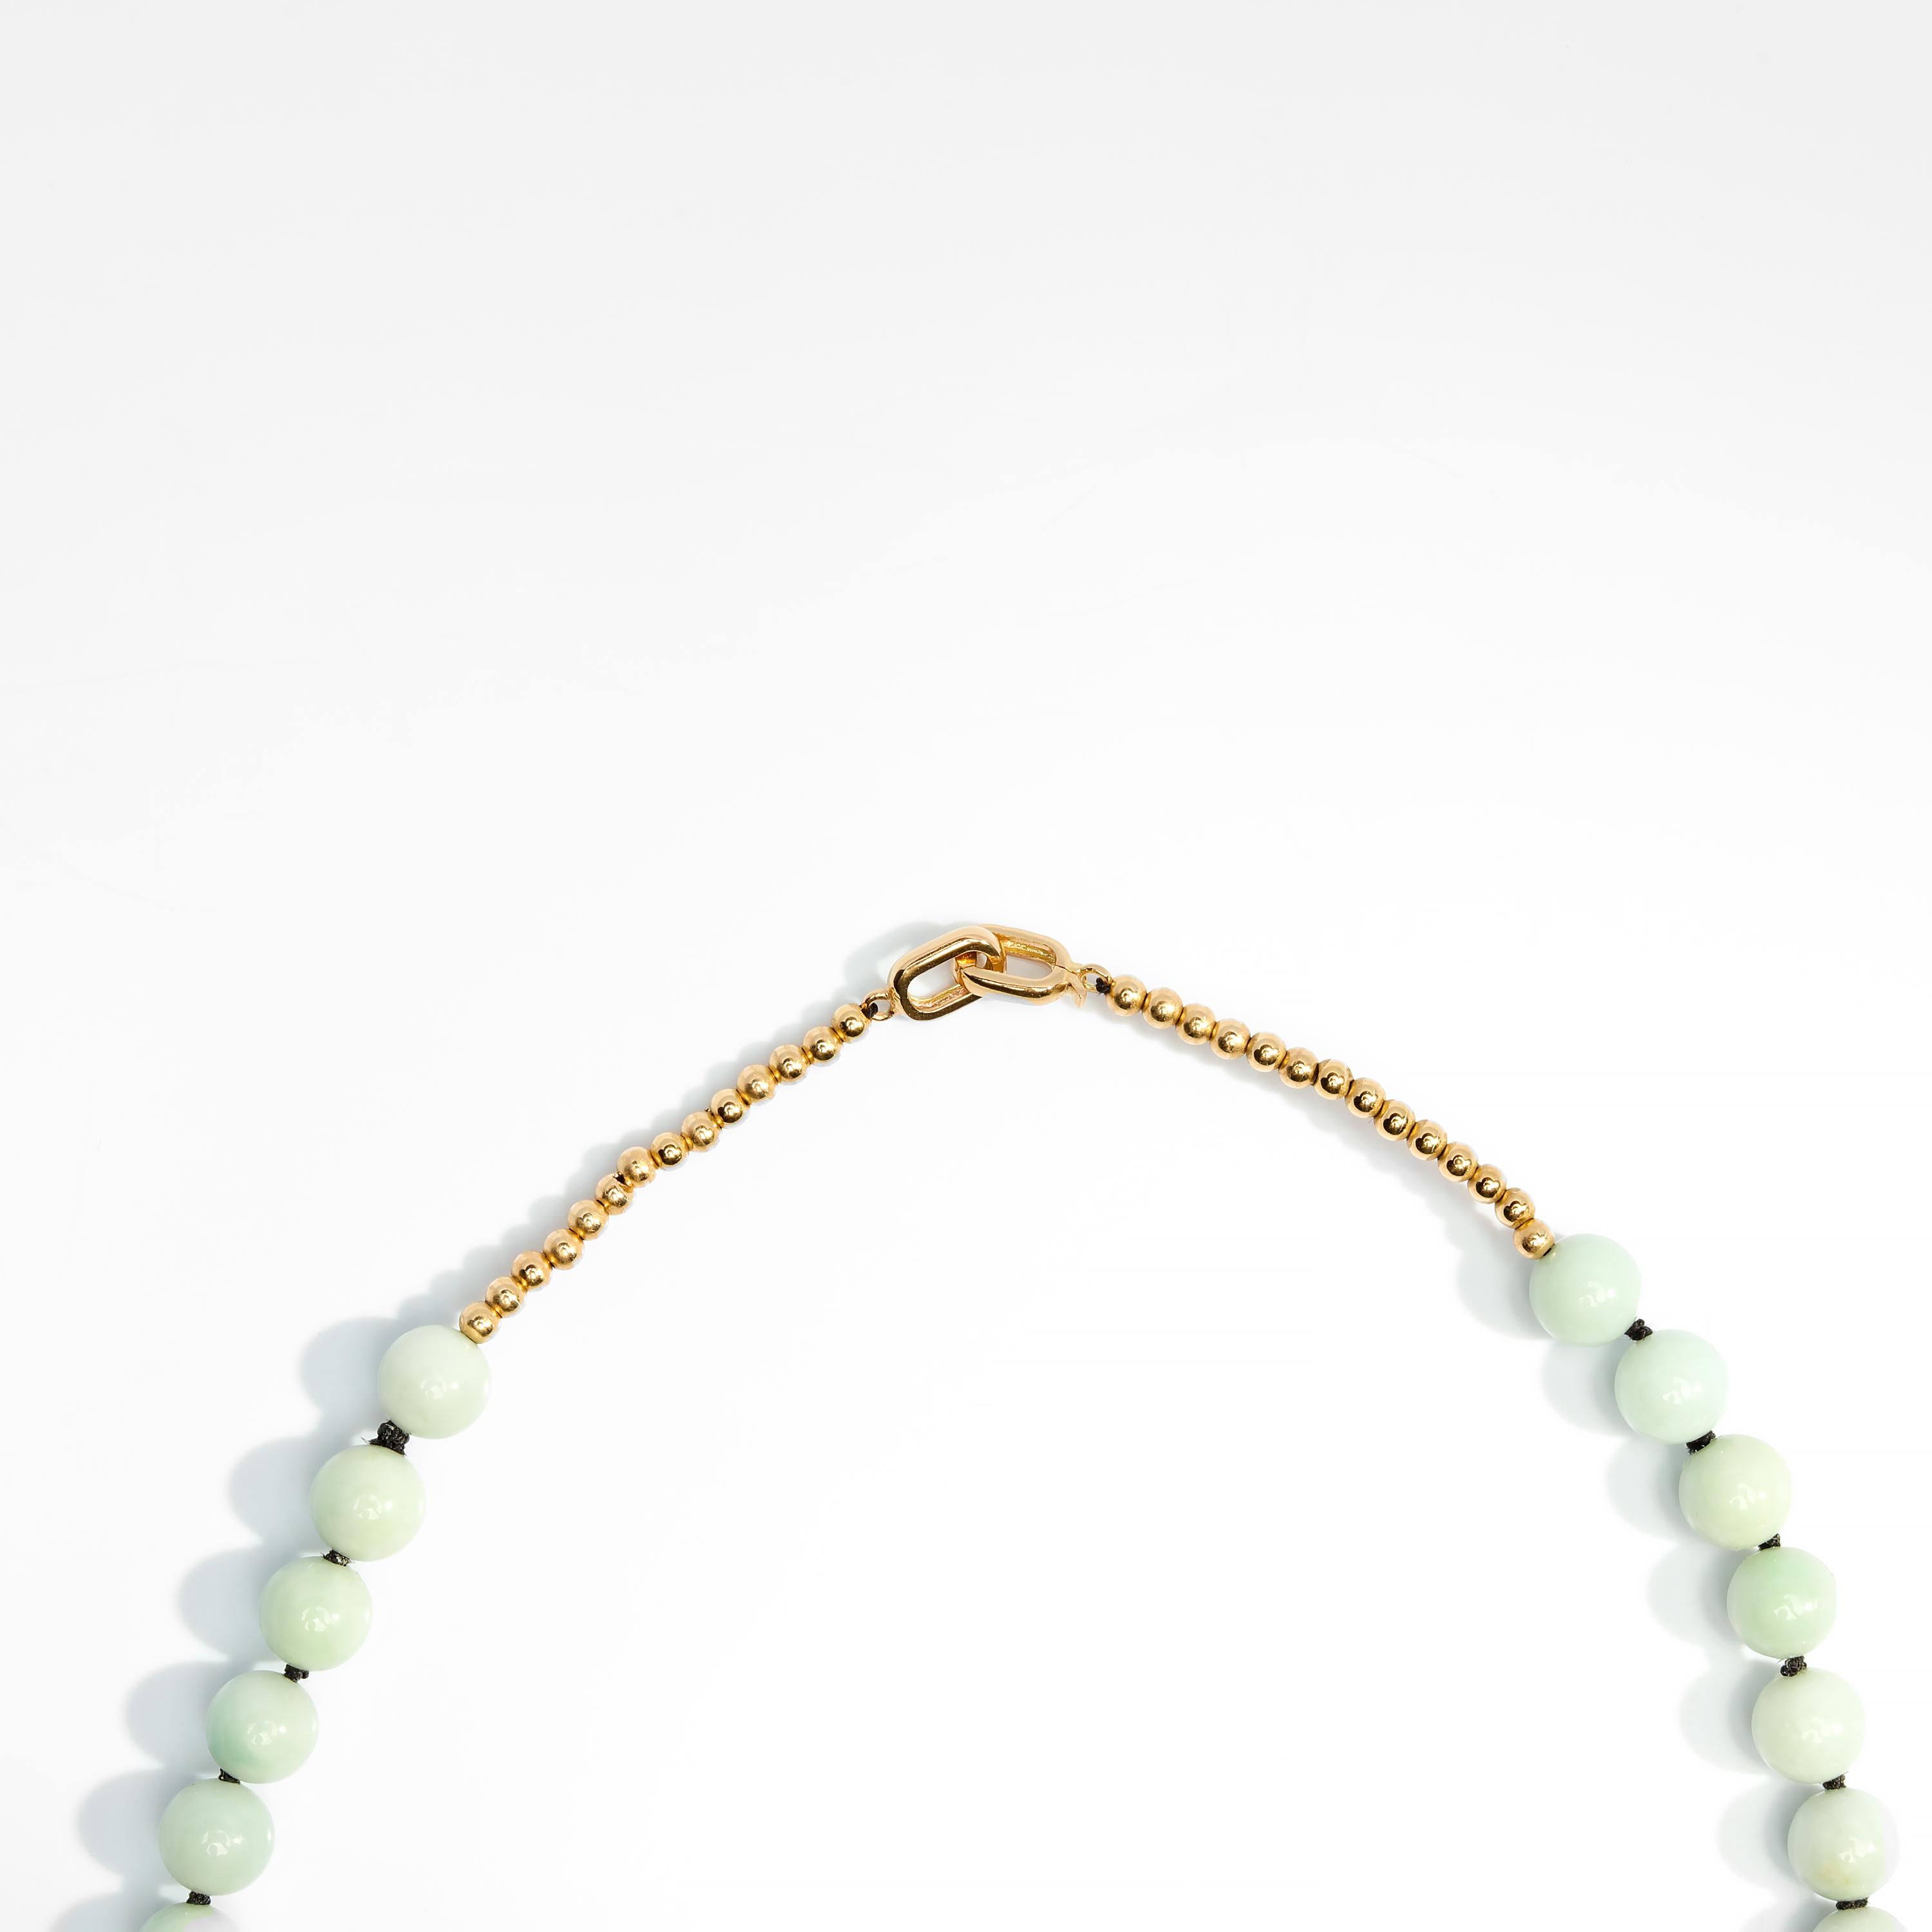 Jade Necklace of Soft Bluish-Green Jadeite is Unexpectedly Sublime 1